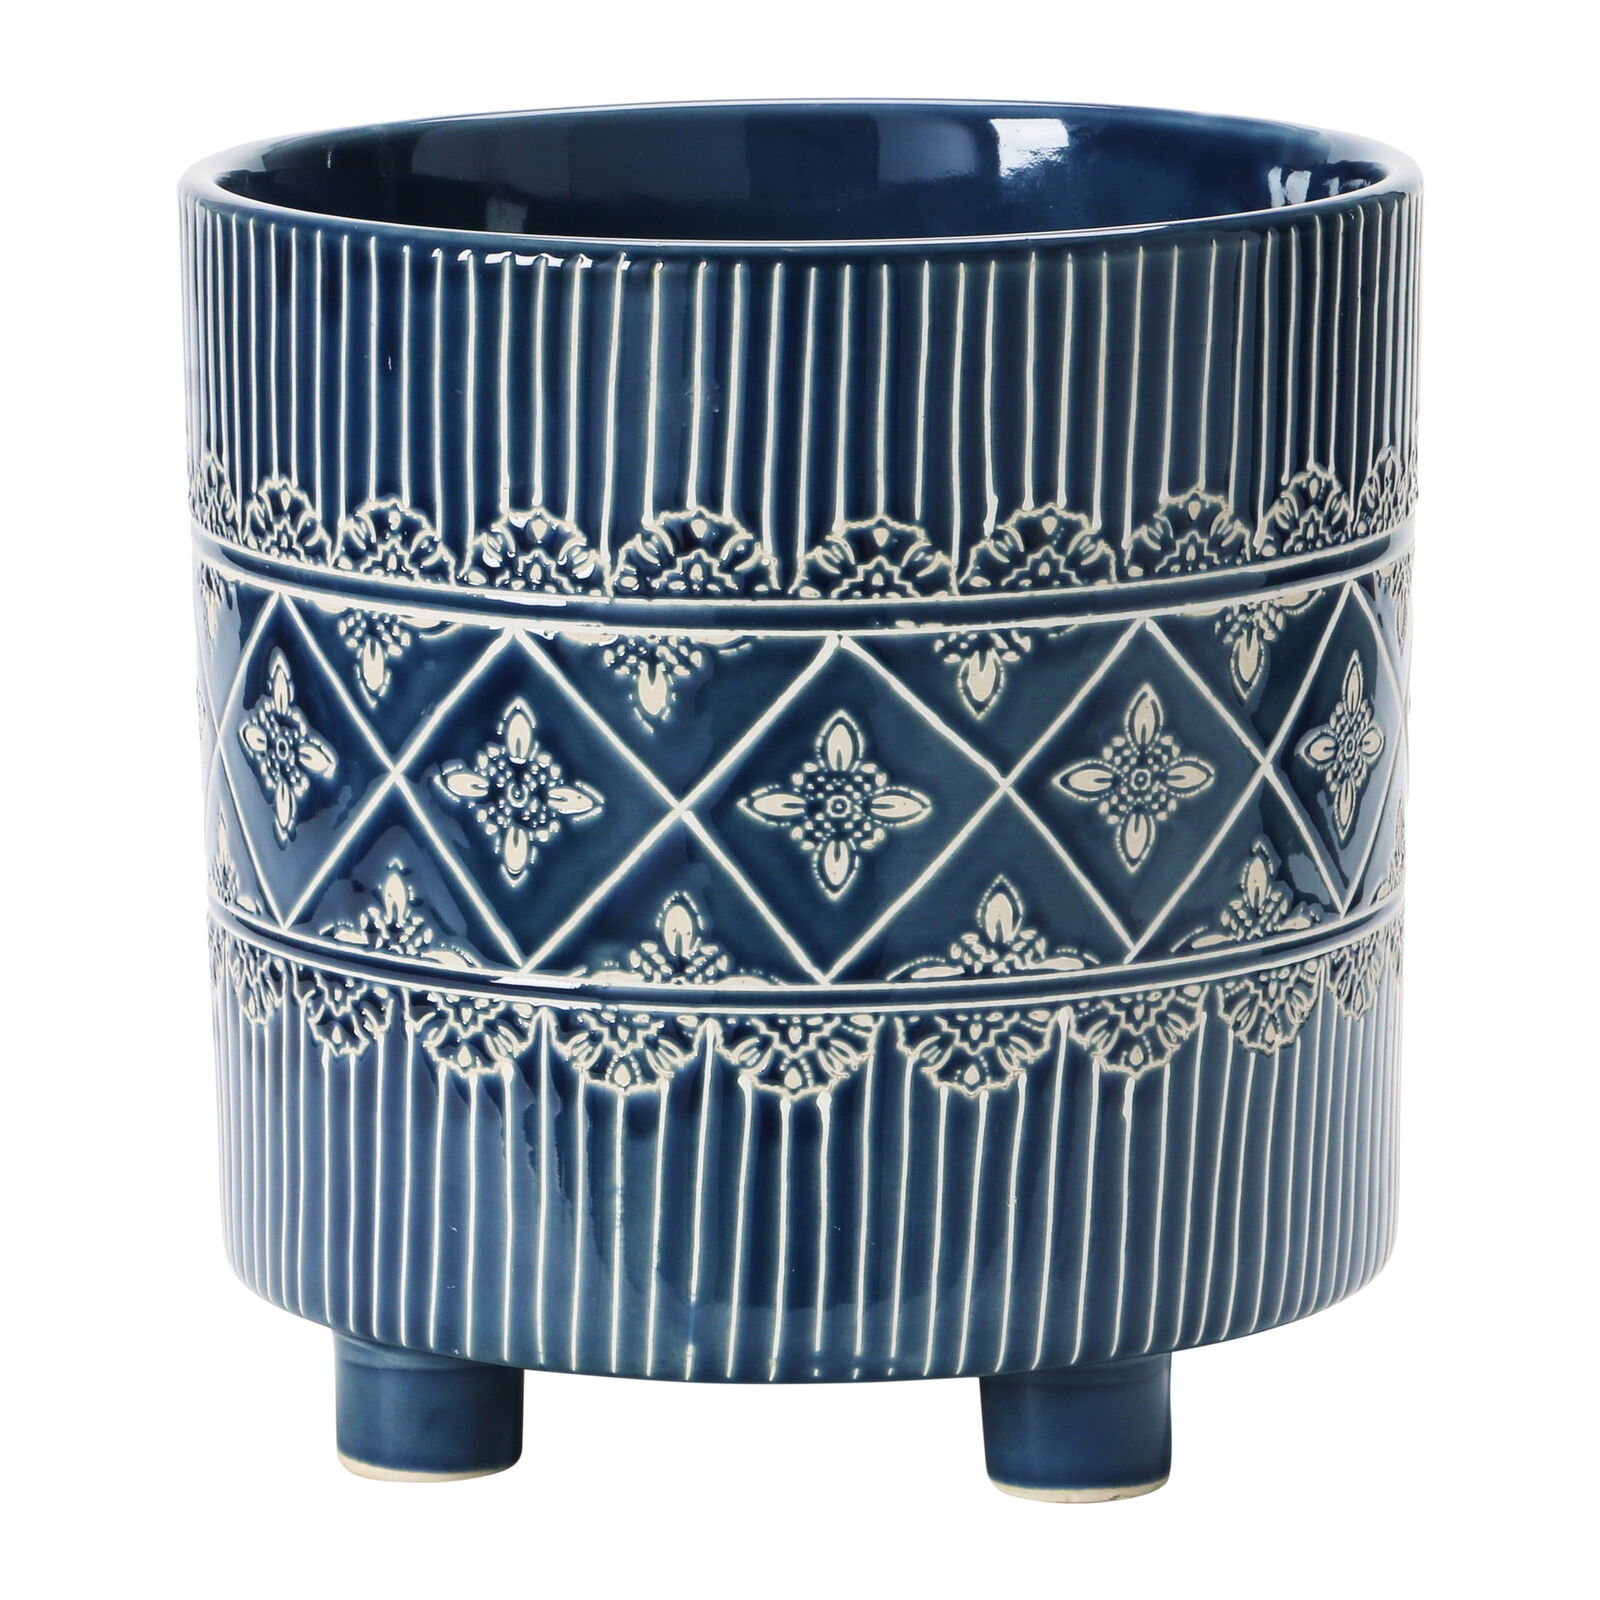 Creative Co-Op Debossed Stoneware Footed Planter with Pattern, Blue and White